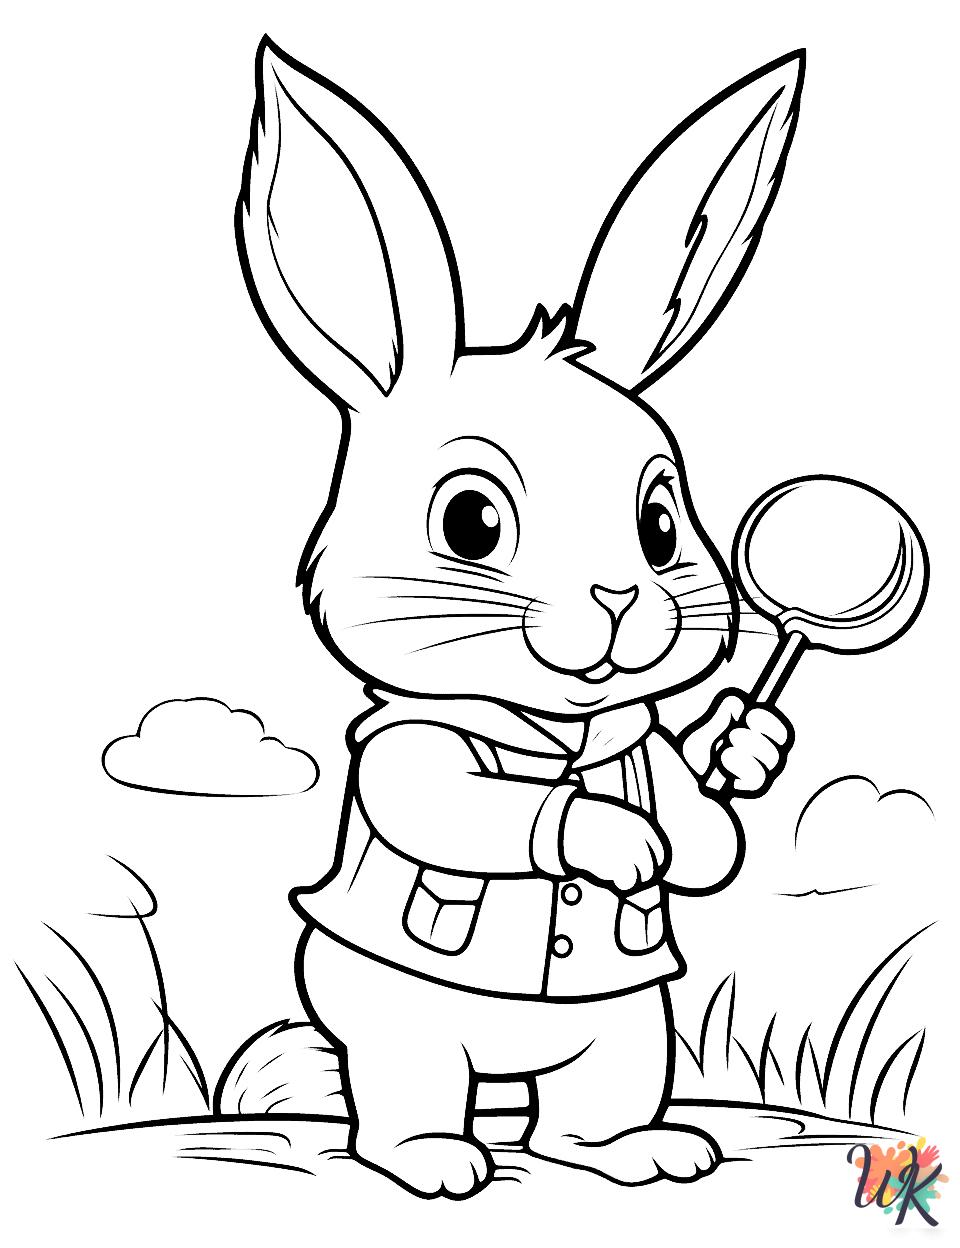 detailed Rabbits coloring pages for adults